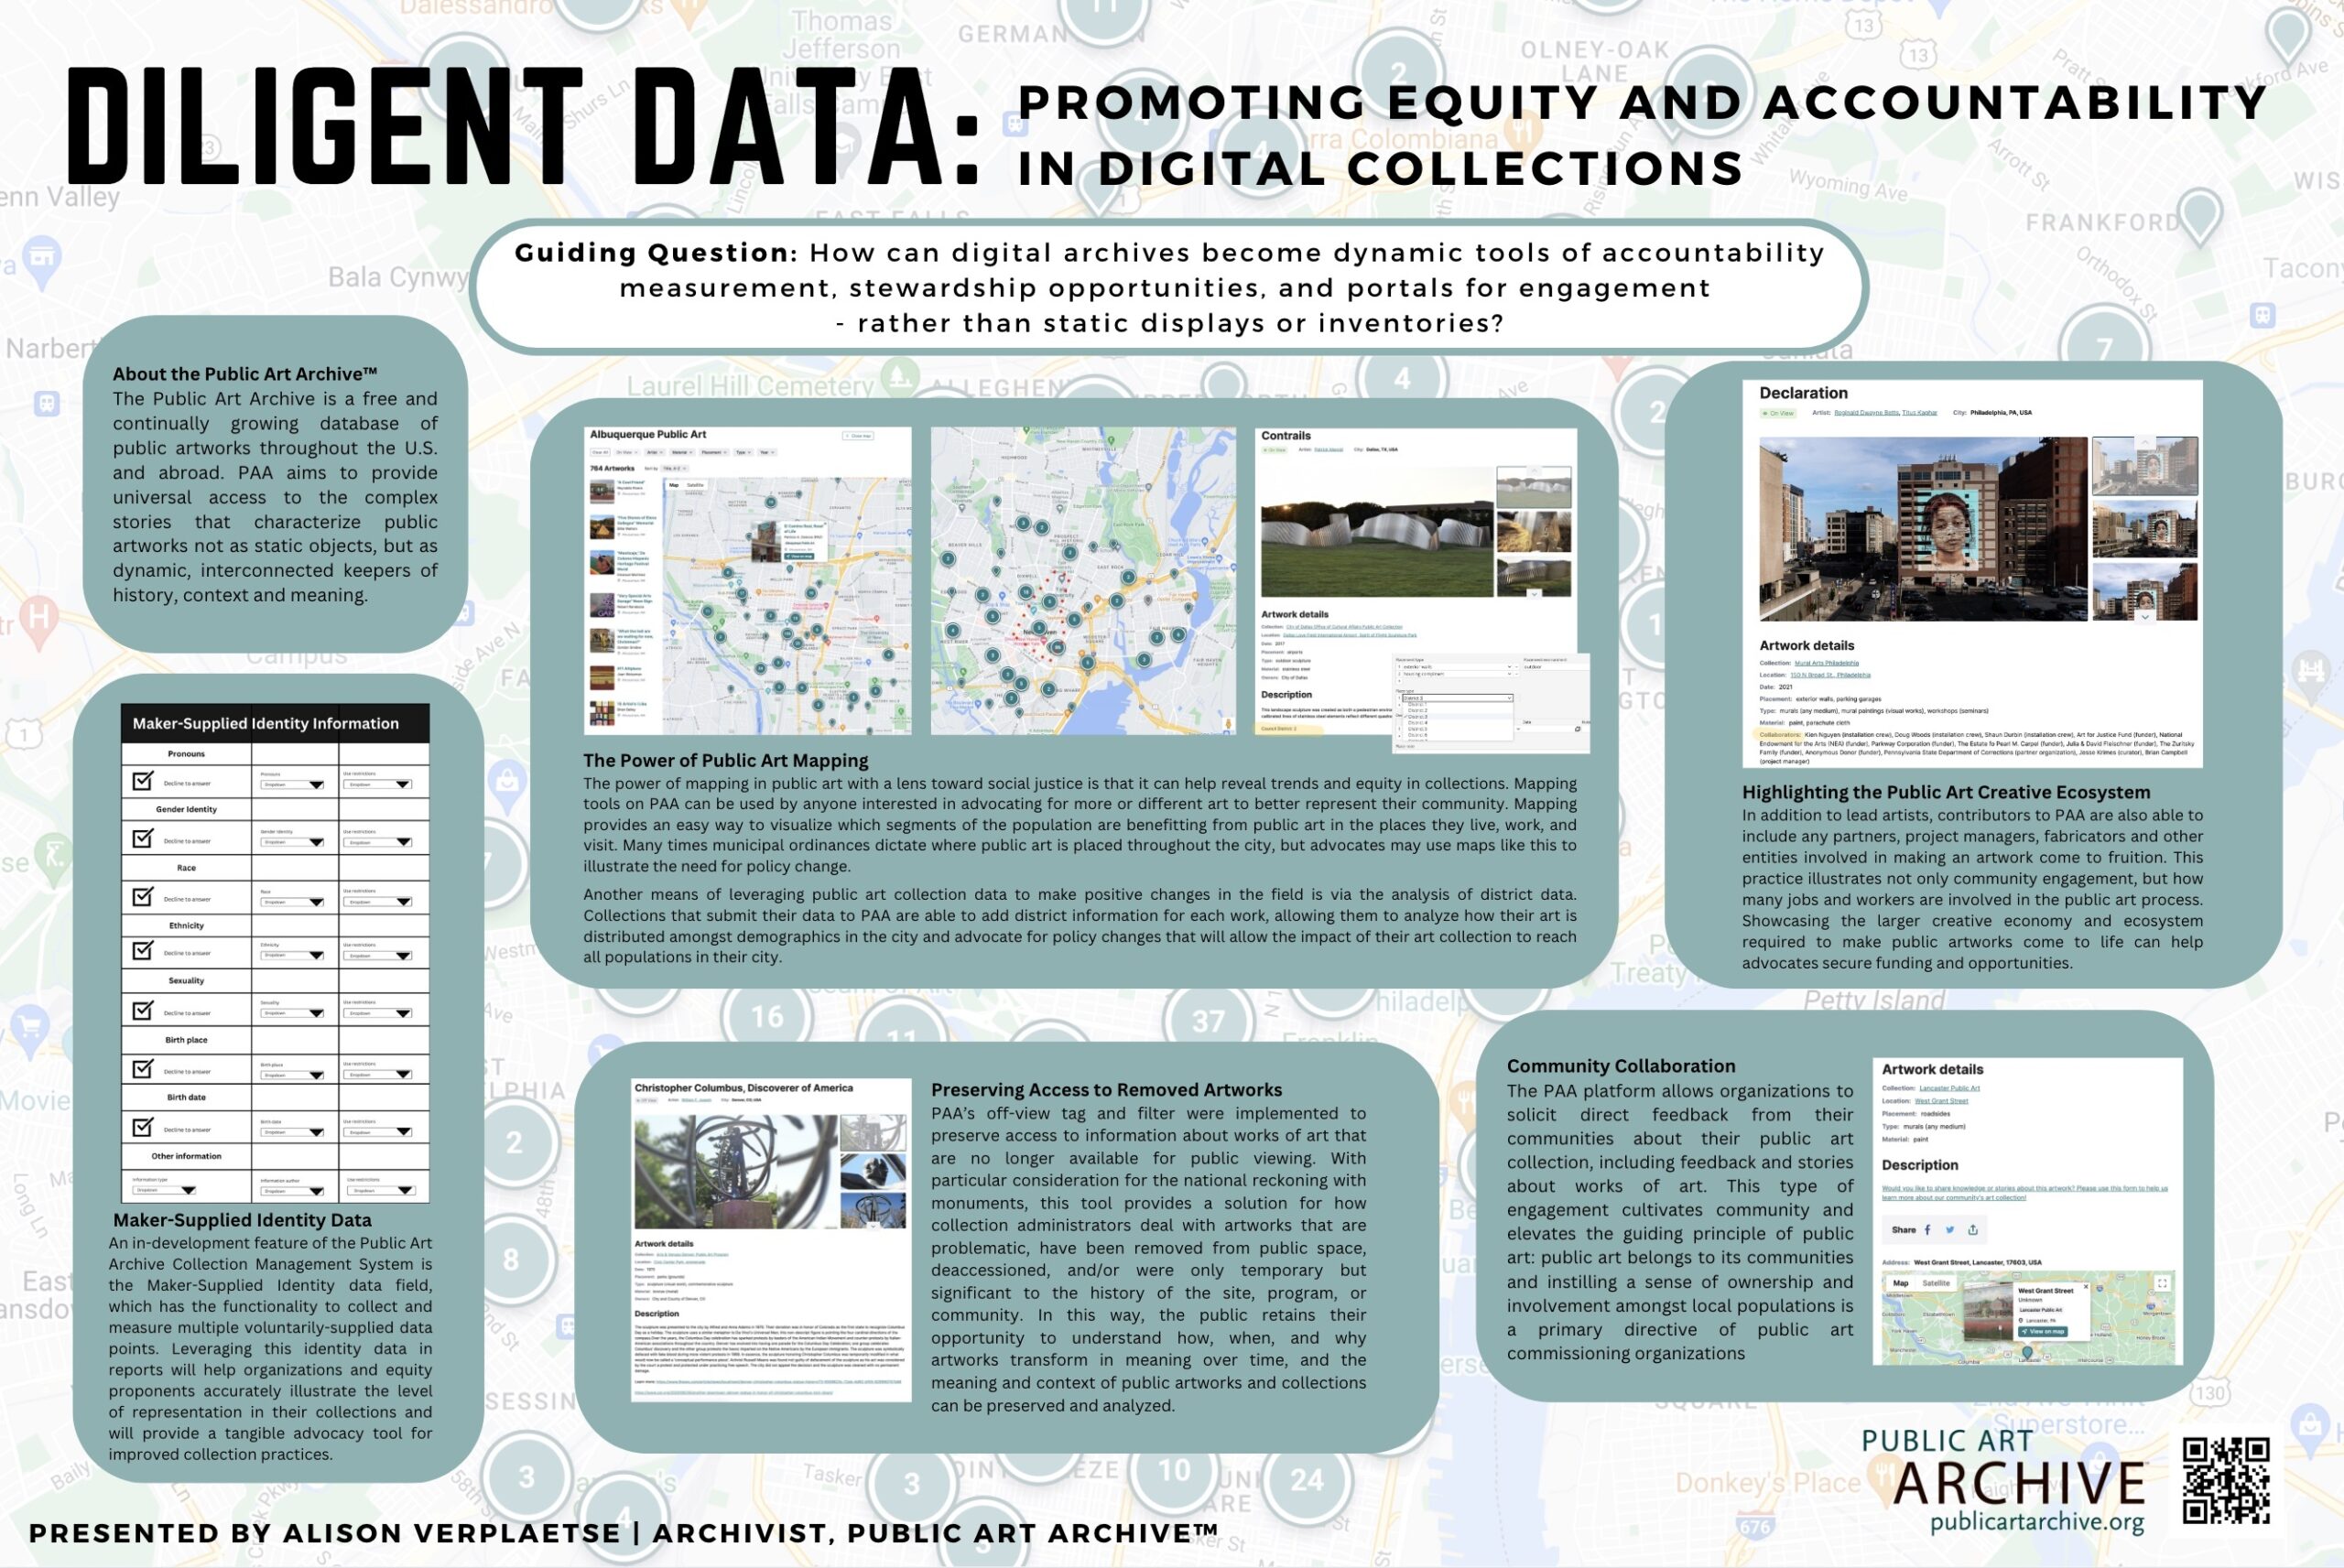 Diligent Data: Promoting Equity & Accountability in Digital Collections